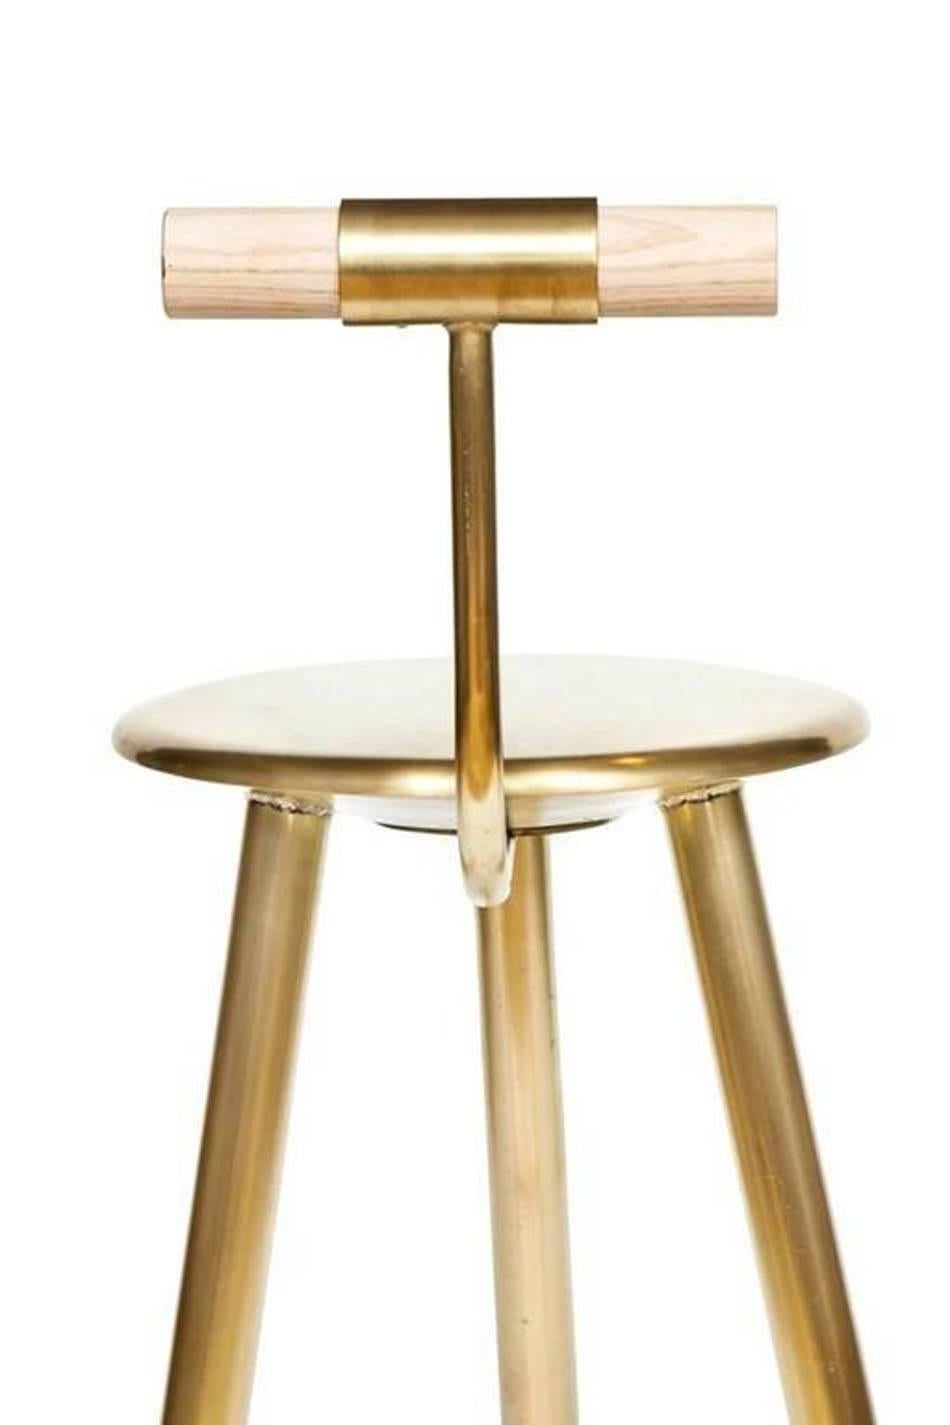 Set of Four Erickson Aesthetics Brass Stool In Excellent Condition For Sale In New York, NY